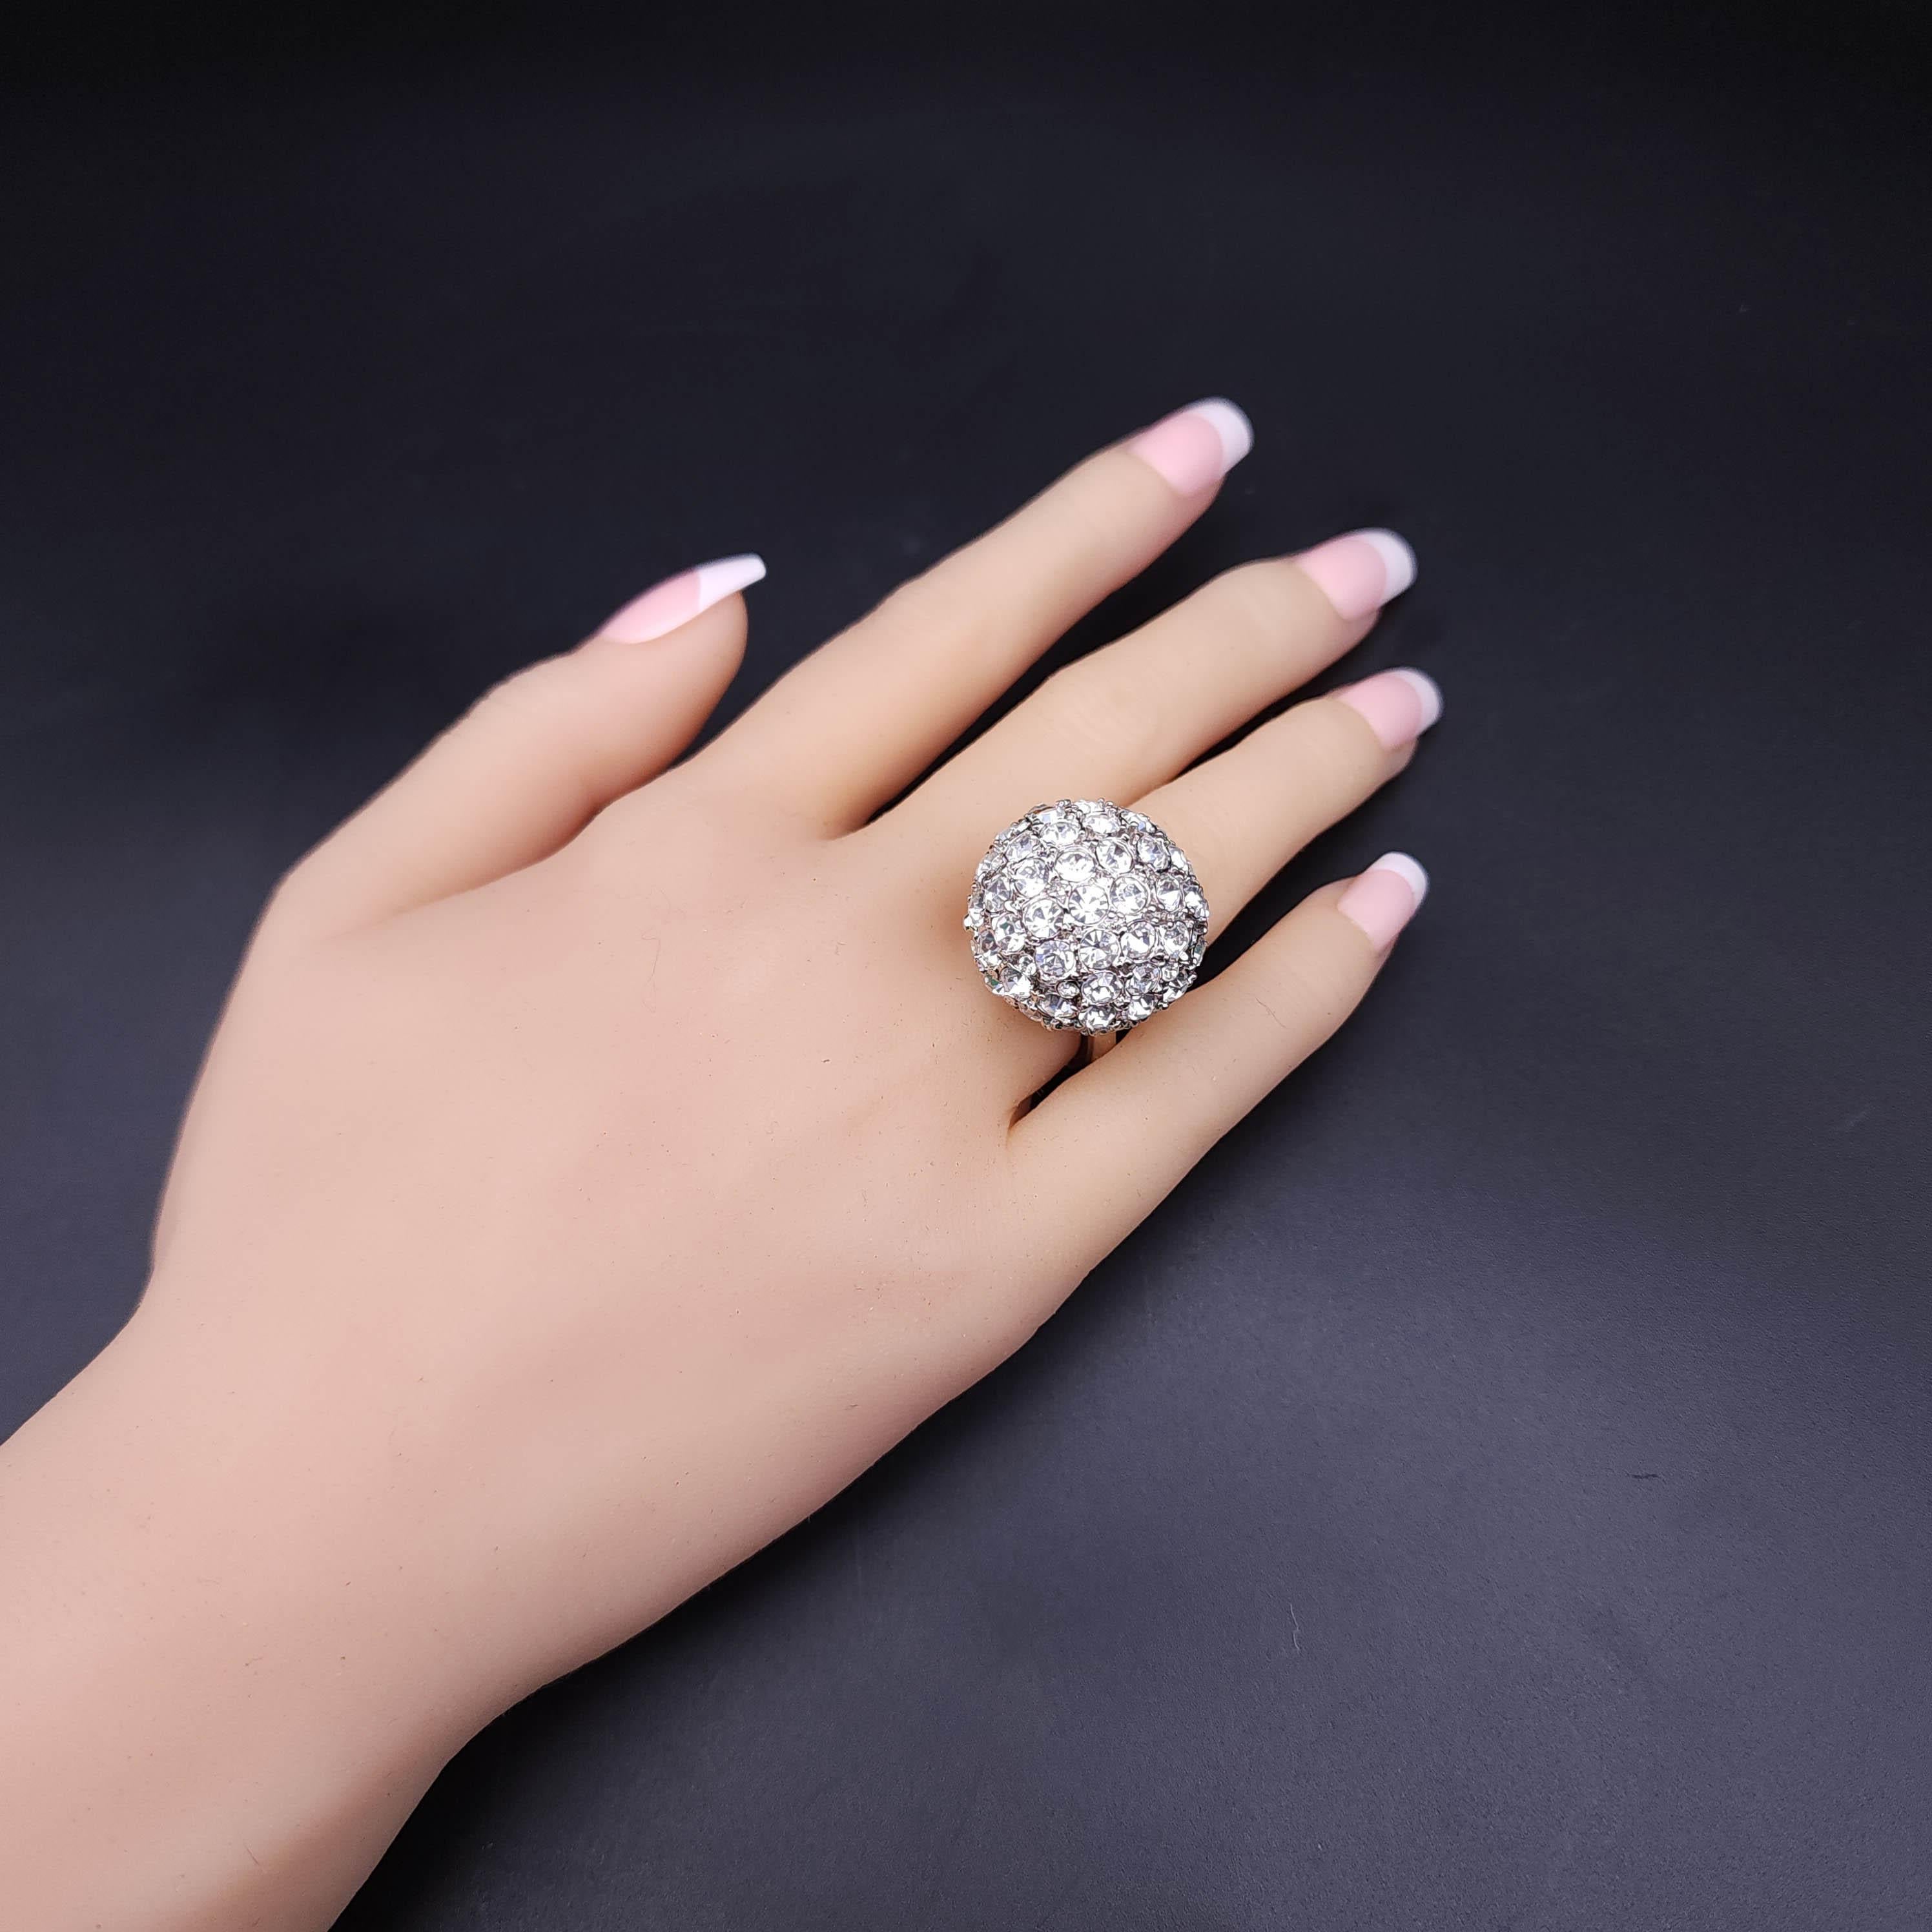 Elevate your evening attire with the Kenneth J Lane Disco Ball cocktail ring. This exquisite piece features a dazzling display of pave-set crystals that catch the light from every angle, reminiscent of a shimmering disco ball. Crafted in a sleek